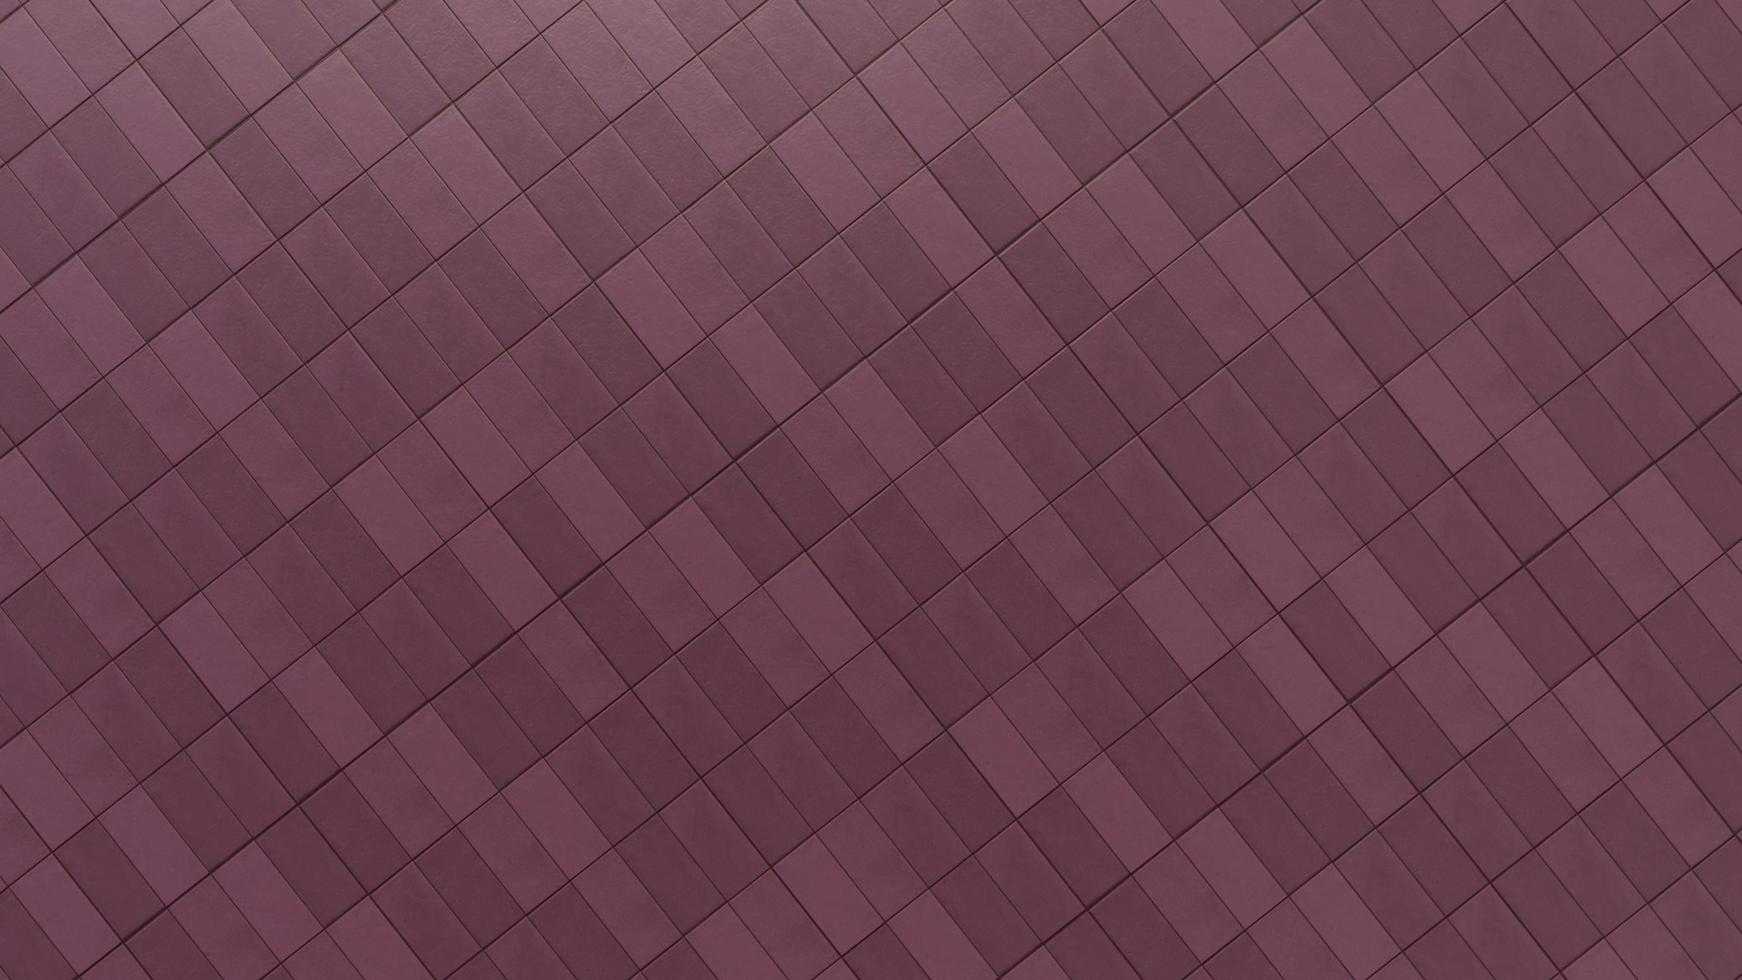 Stone pattern brown for background or cover photo